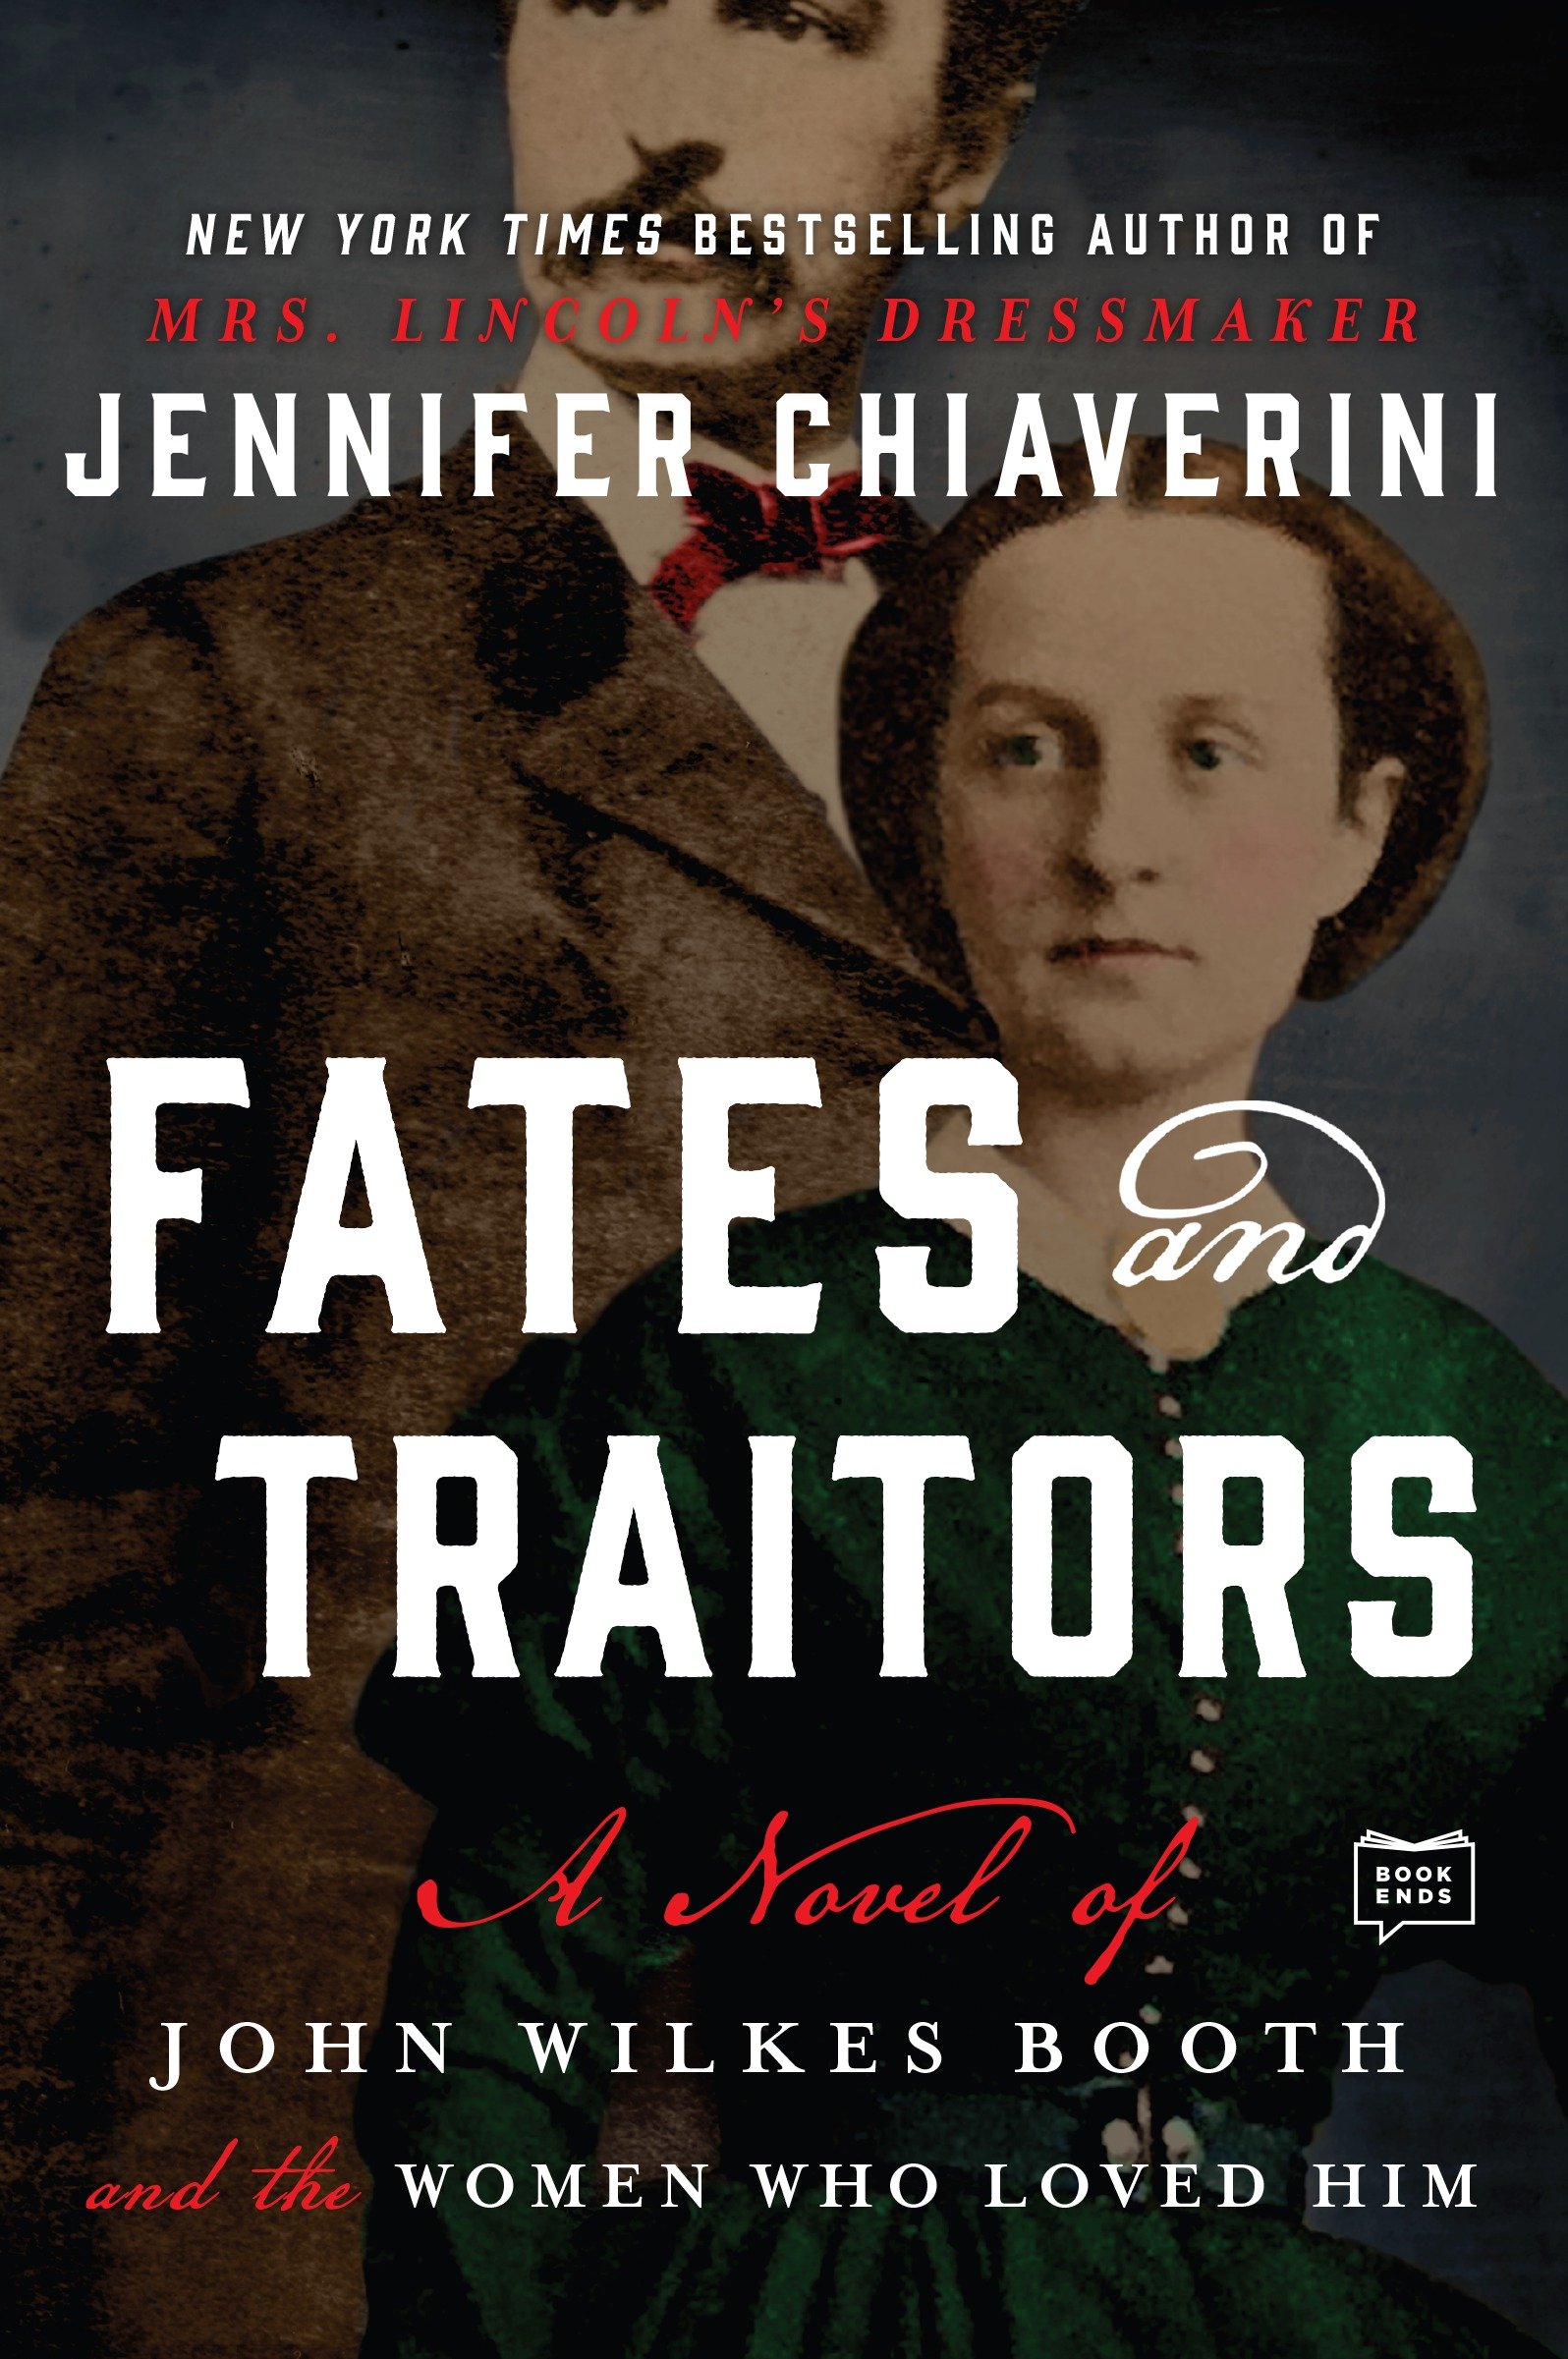 Image de couverture de Fates and Traitors [electronic resource] : A Novel of John Wilkes Booth